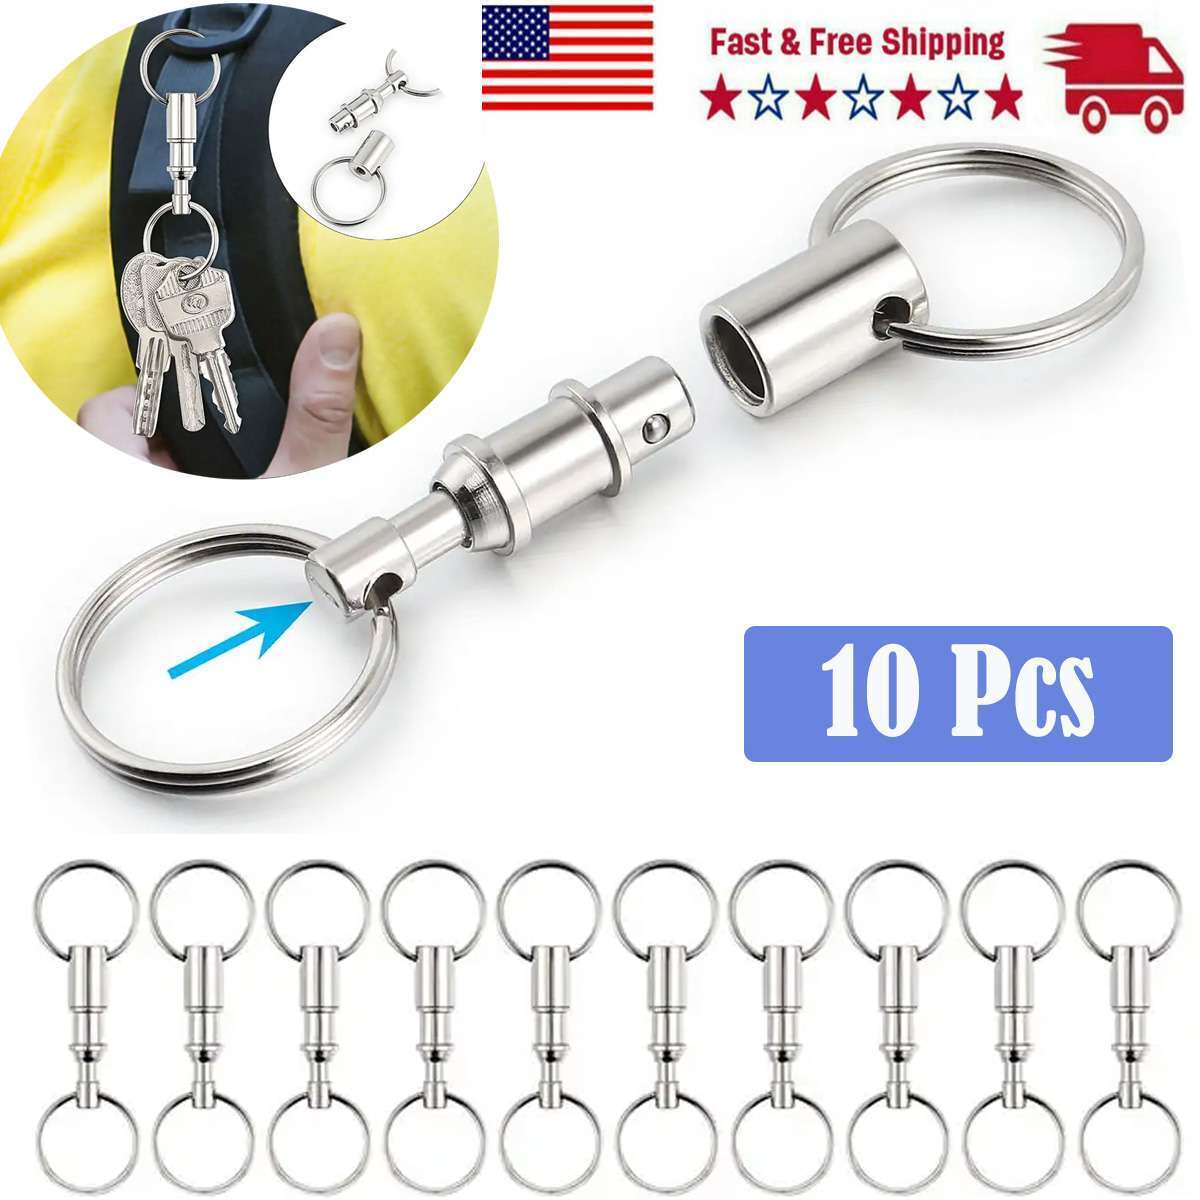 10-Pack Detachable Pull Apart Quick Release Keychain Key Rings Key Chain NEW